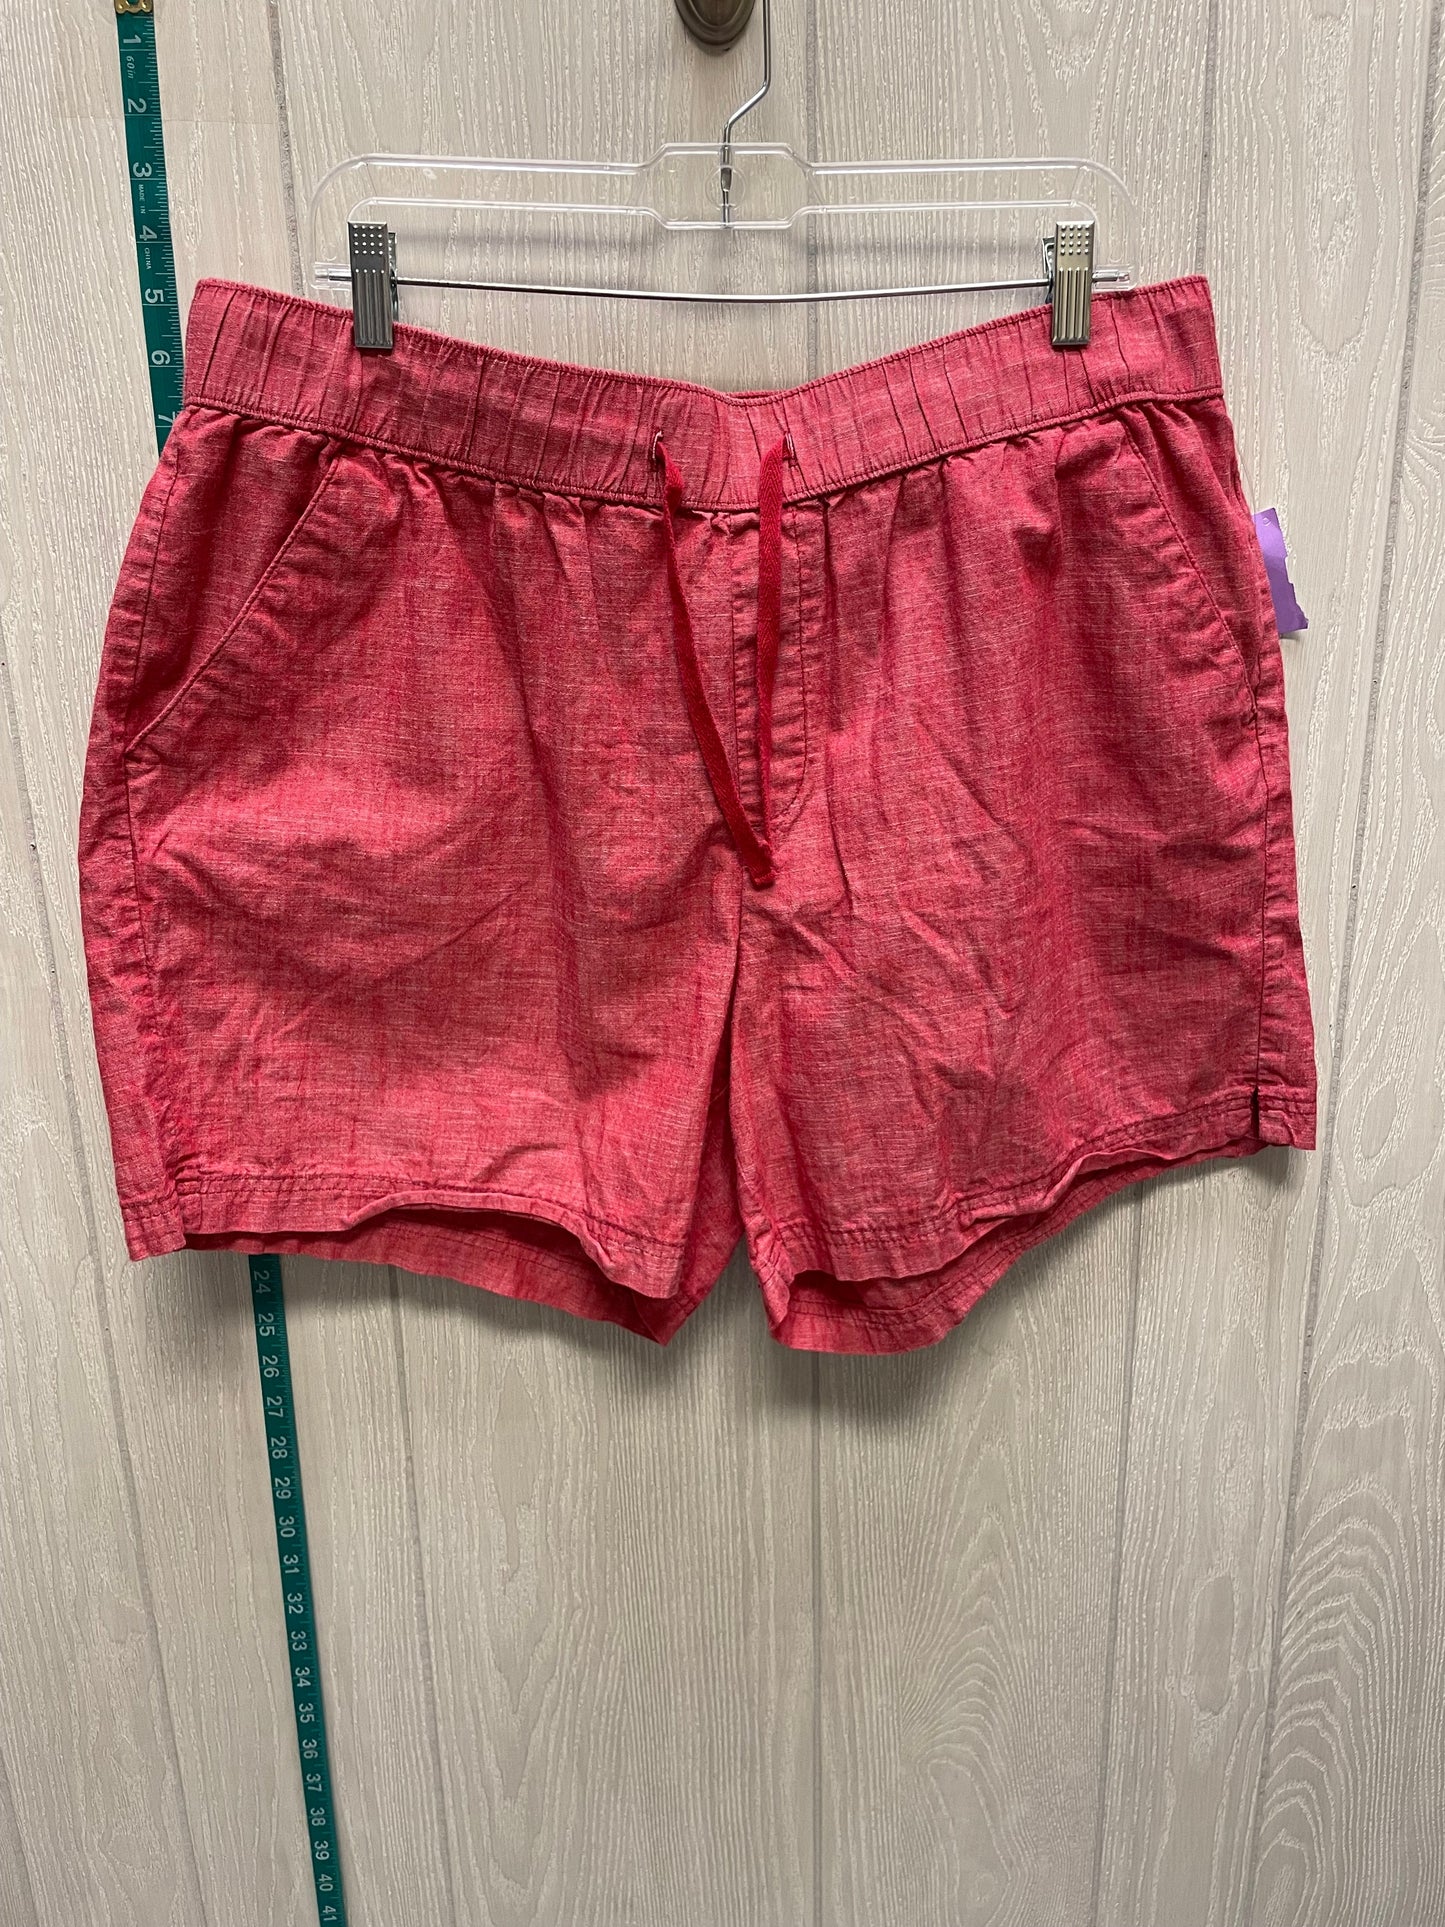 Red Shorts Bcg, Size 1x